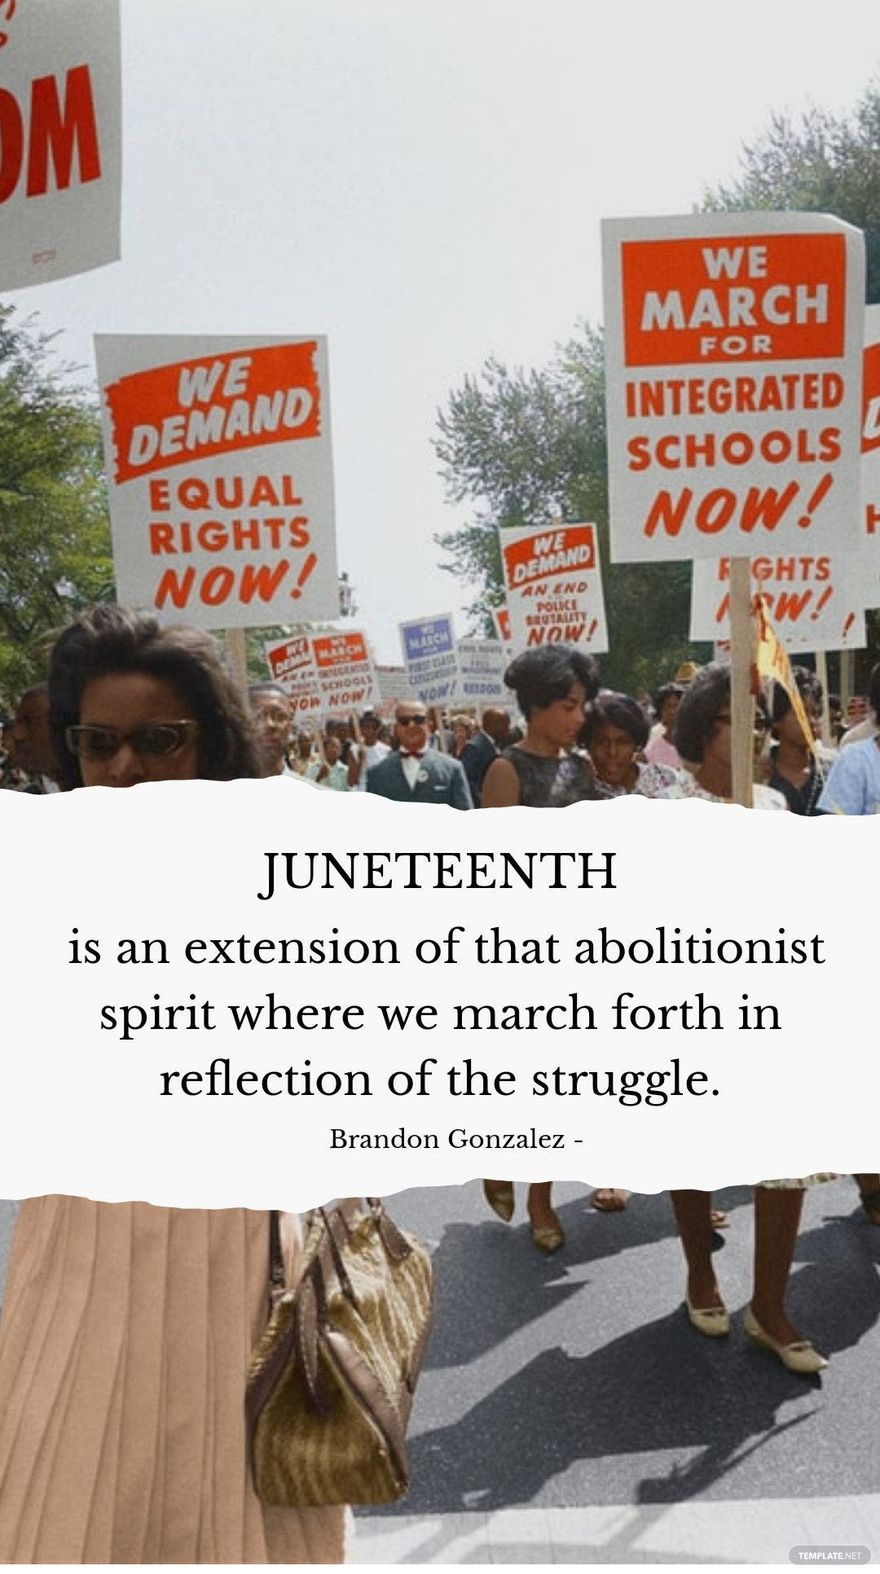 Free Brandon Gonzalez - Juneteenth is an extension of that abolitionist spirit where we march forth in reflection of the struggle.